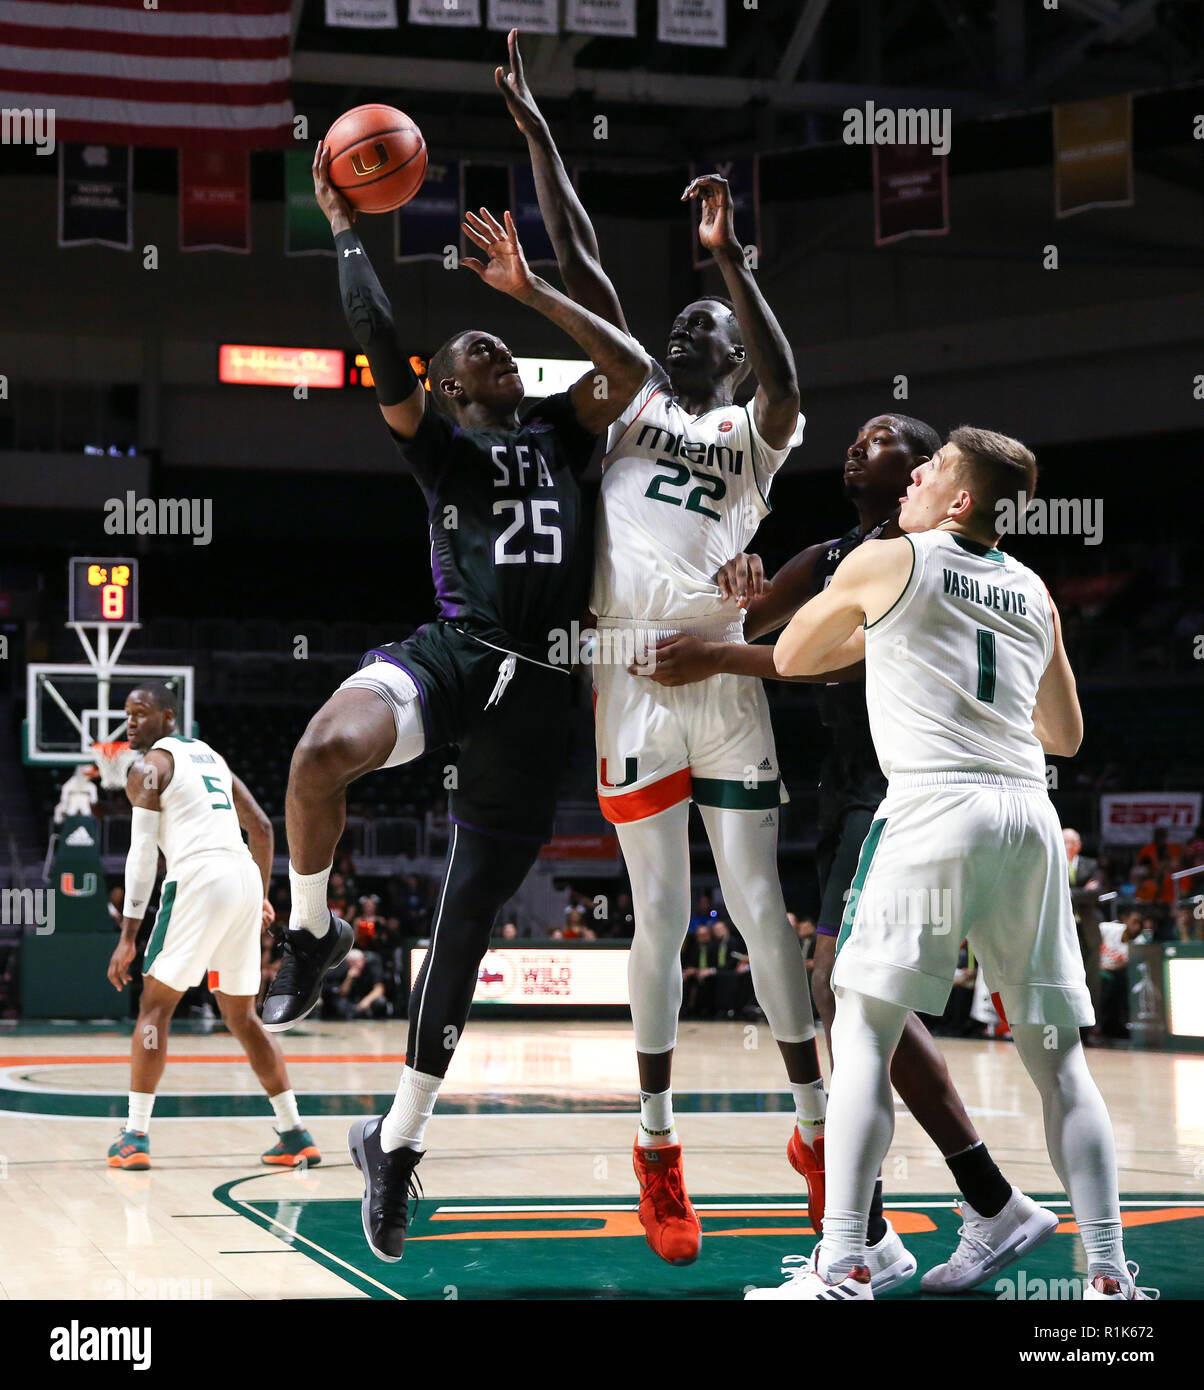 Coral Gables, Florida, USA. 13th Nov, 2018. Stephen F. Austin Lumberjacks forward Karl Nicholas (25) shoots to the basket, challenged by Miami Hurricanes forward Deng Gak (22), as Stephen F. Austin Lumberjacks forward Mitchell Seraille (3) (hidden) and Miami Hurricanes guard Dejan Vasiljevic (1) follow the action, during the second half of the NCAA mens basketball game between the Stephen F. Austin Lumberjacks and the University of Miami Hurricanes at the Watsco Center in Coral Gables, Florida. The Hurricanes won 96 - 58. Mario Houben/CSM/Alamy Live News Stock Photo